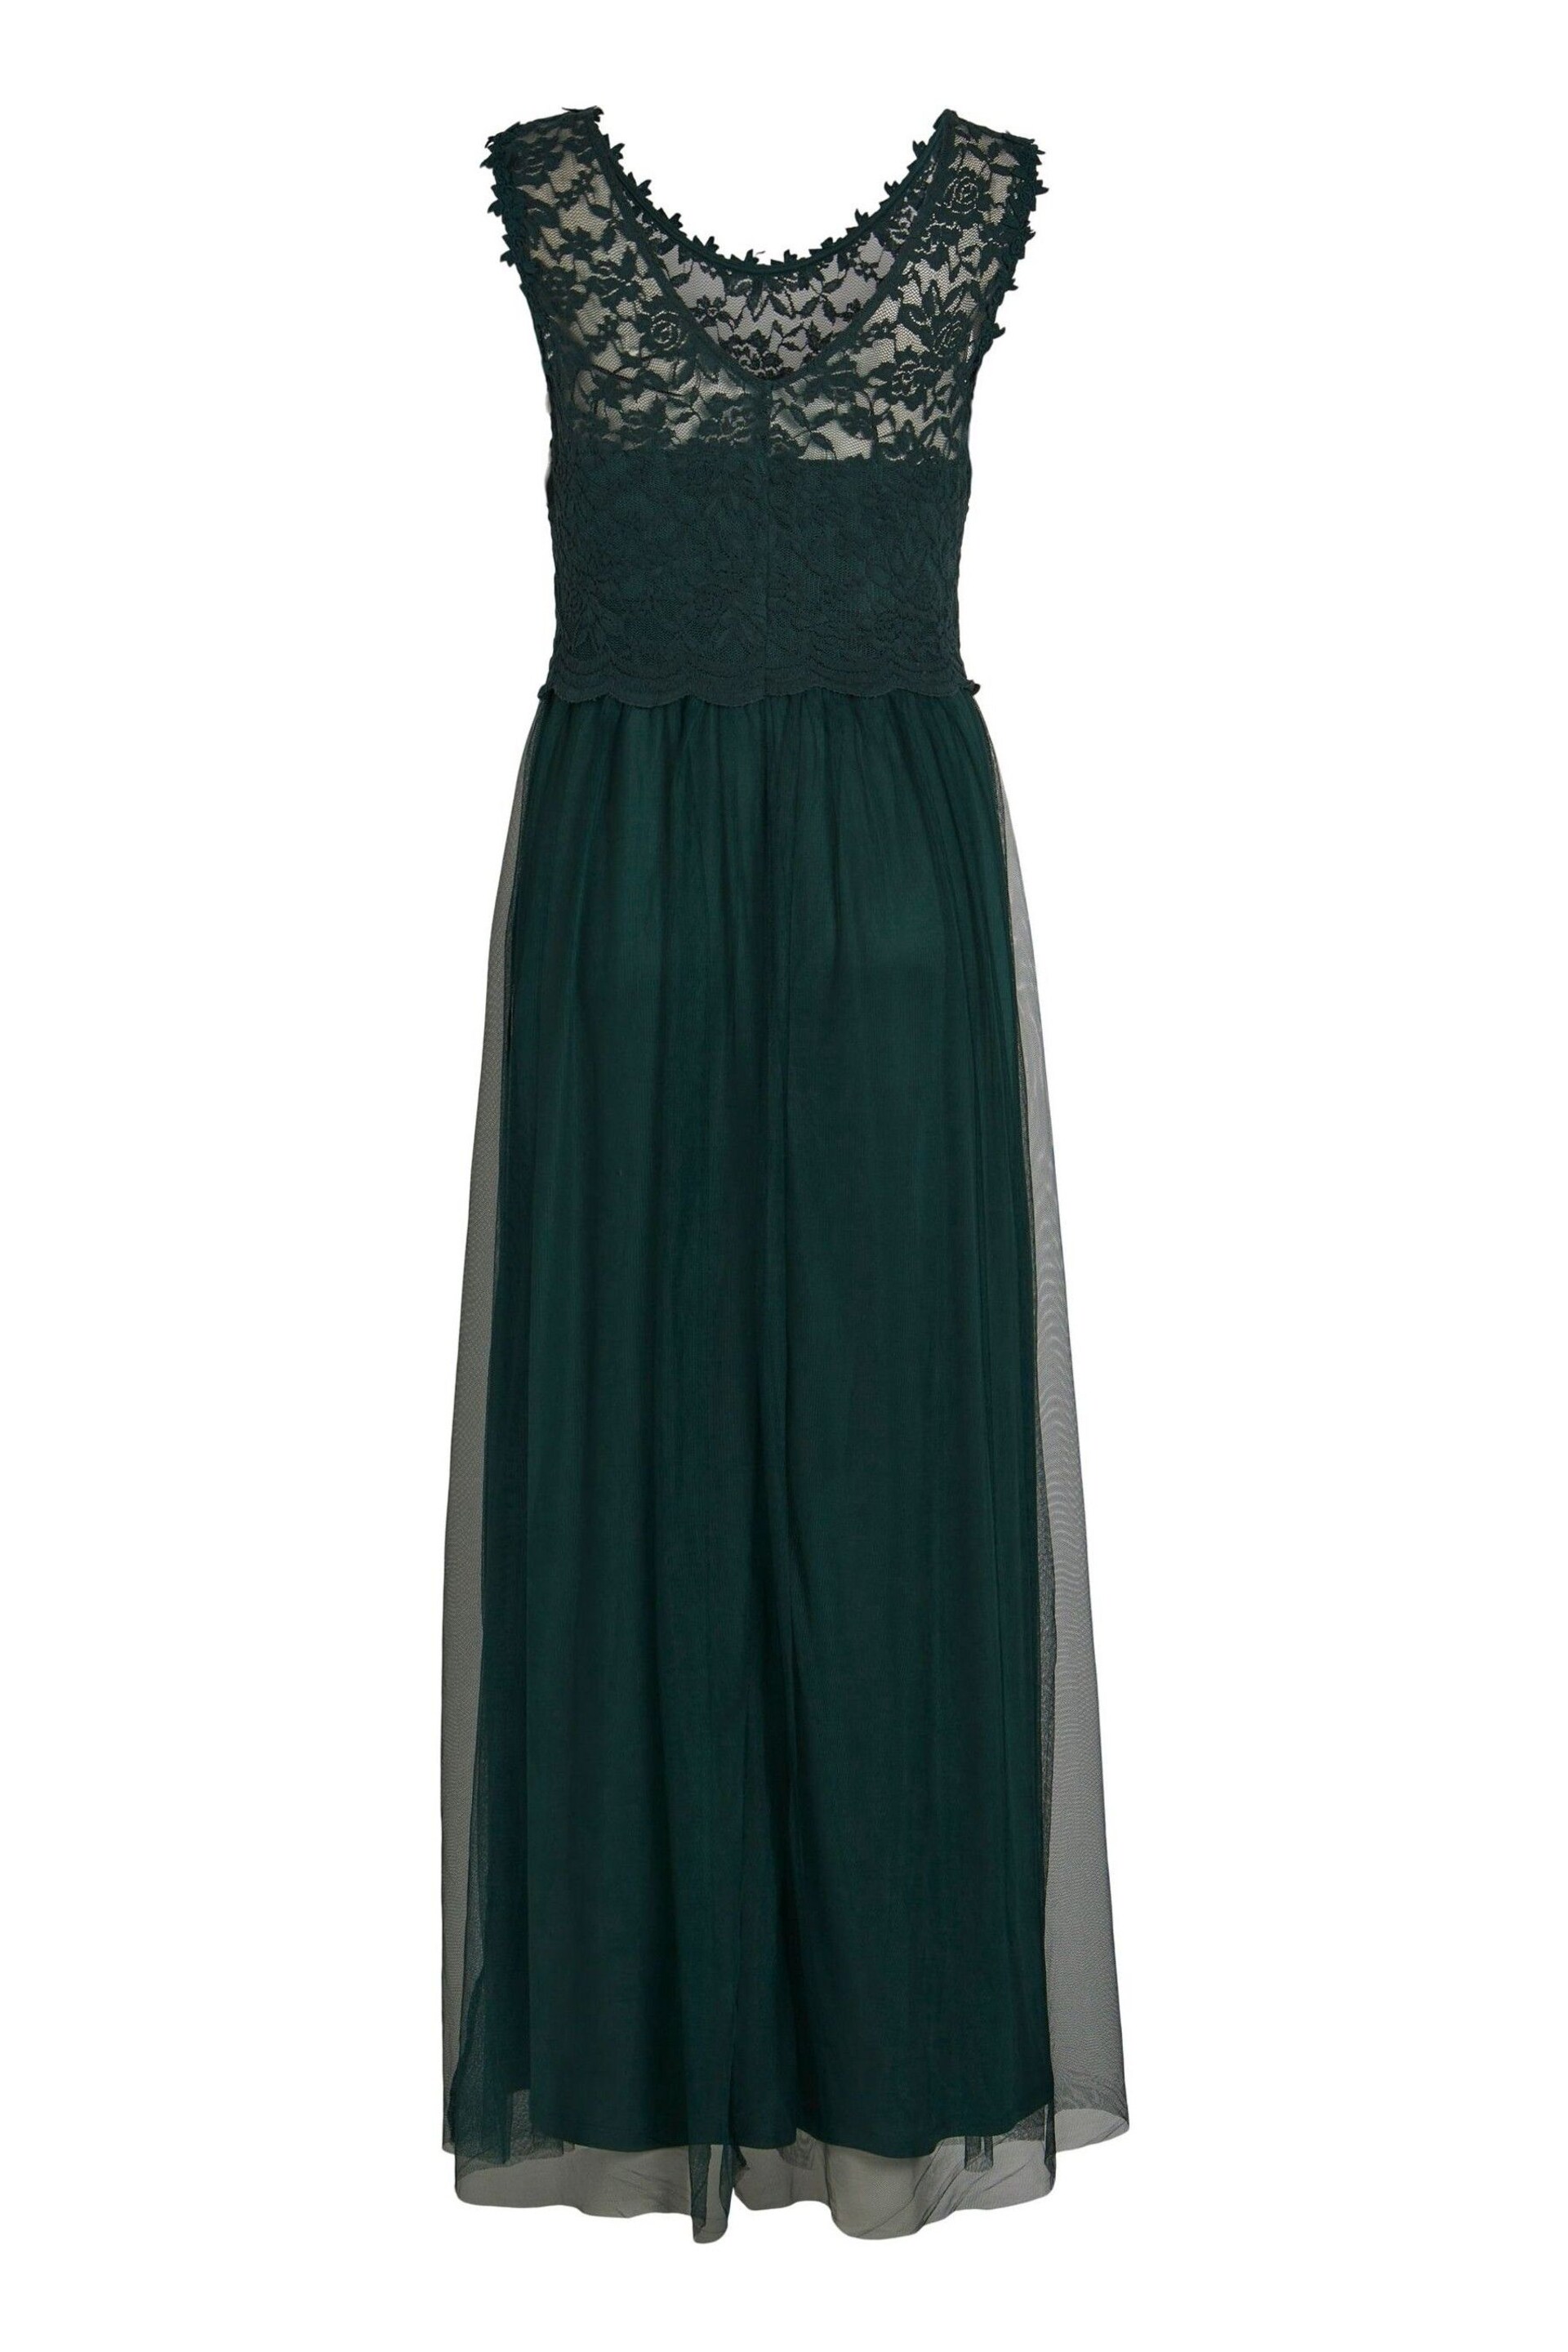 VILA Green Sleeveless Lace And Tulle Maxi Dress - Image 2 of 2